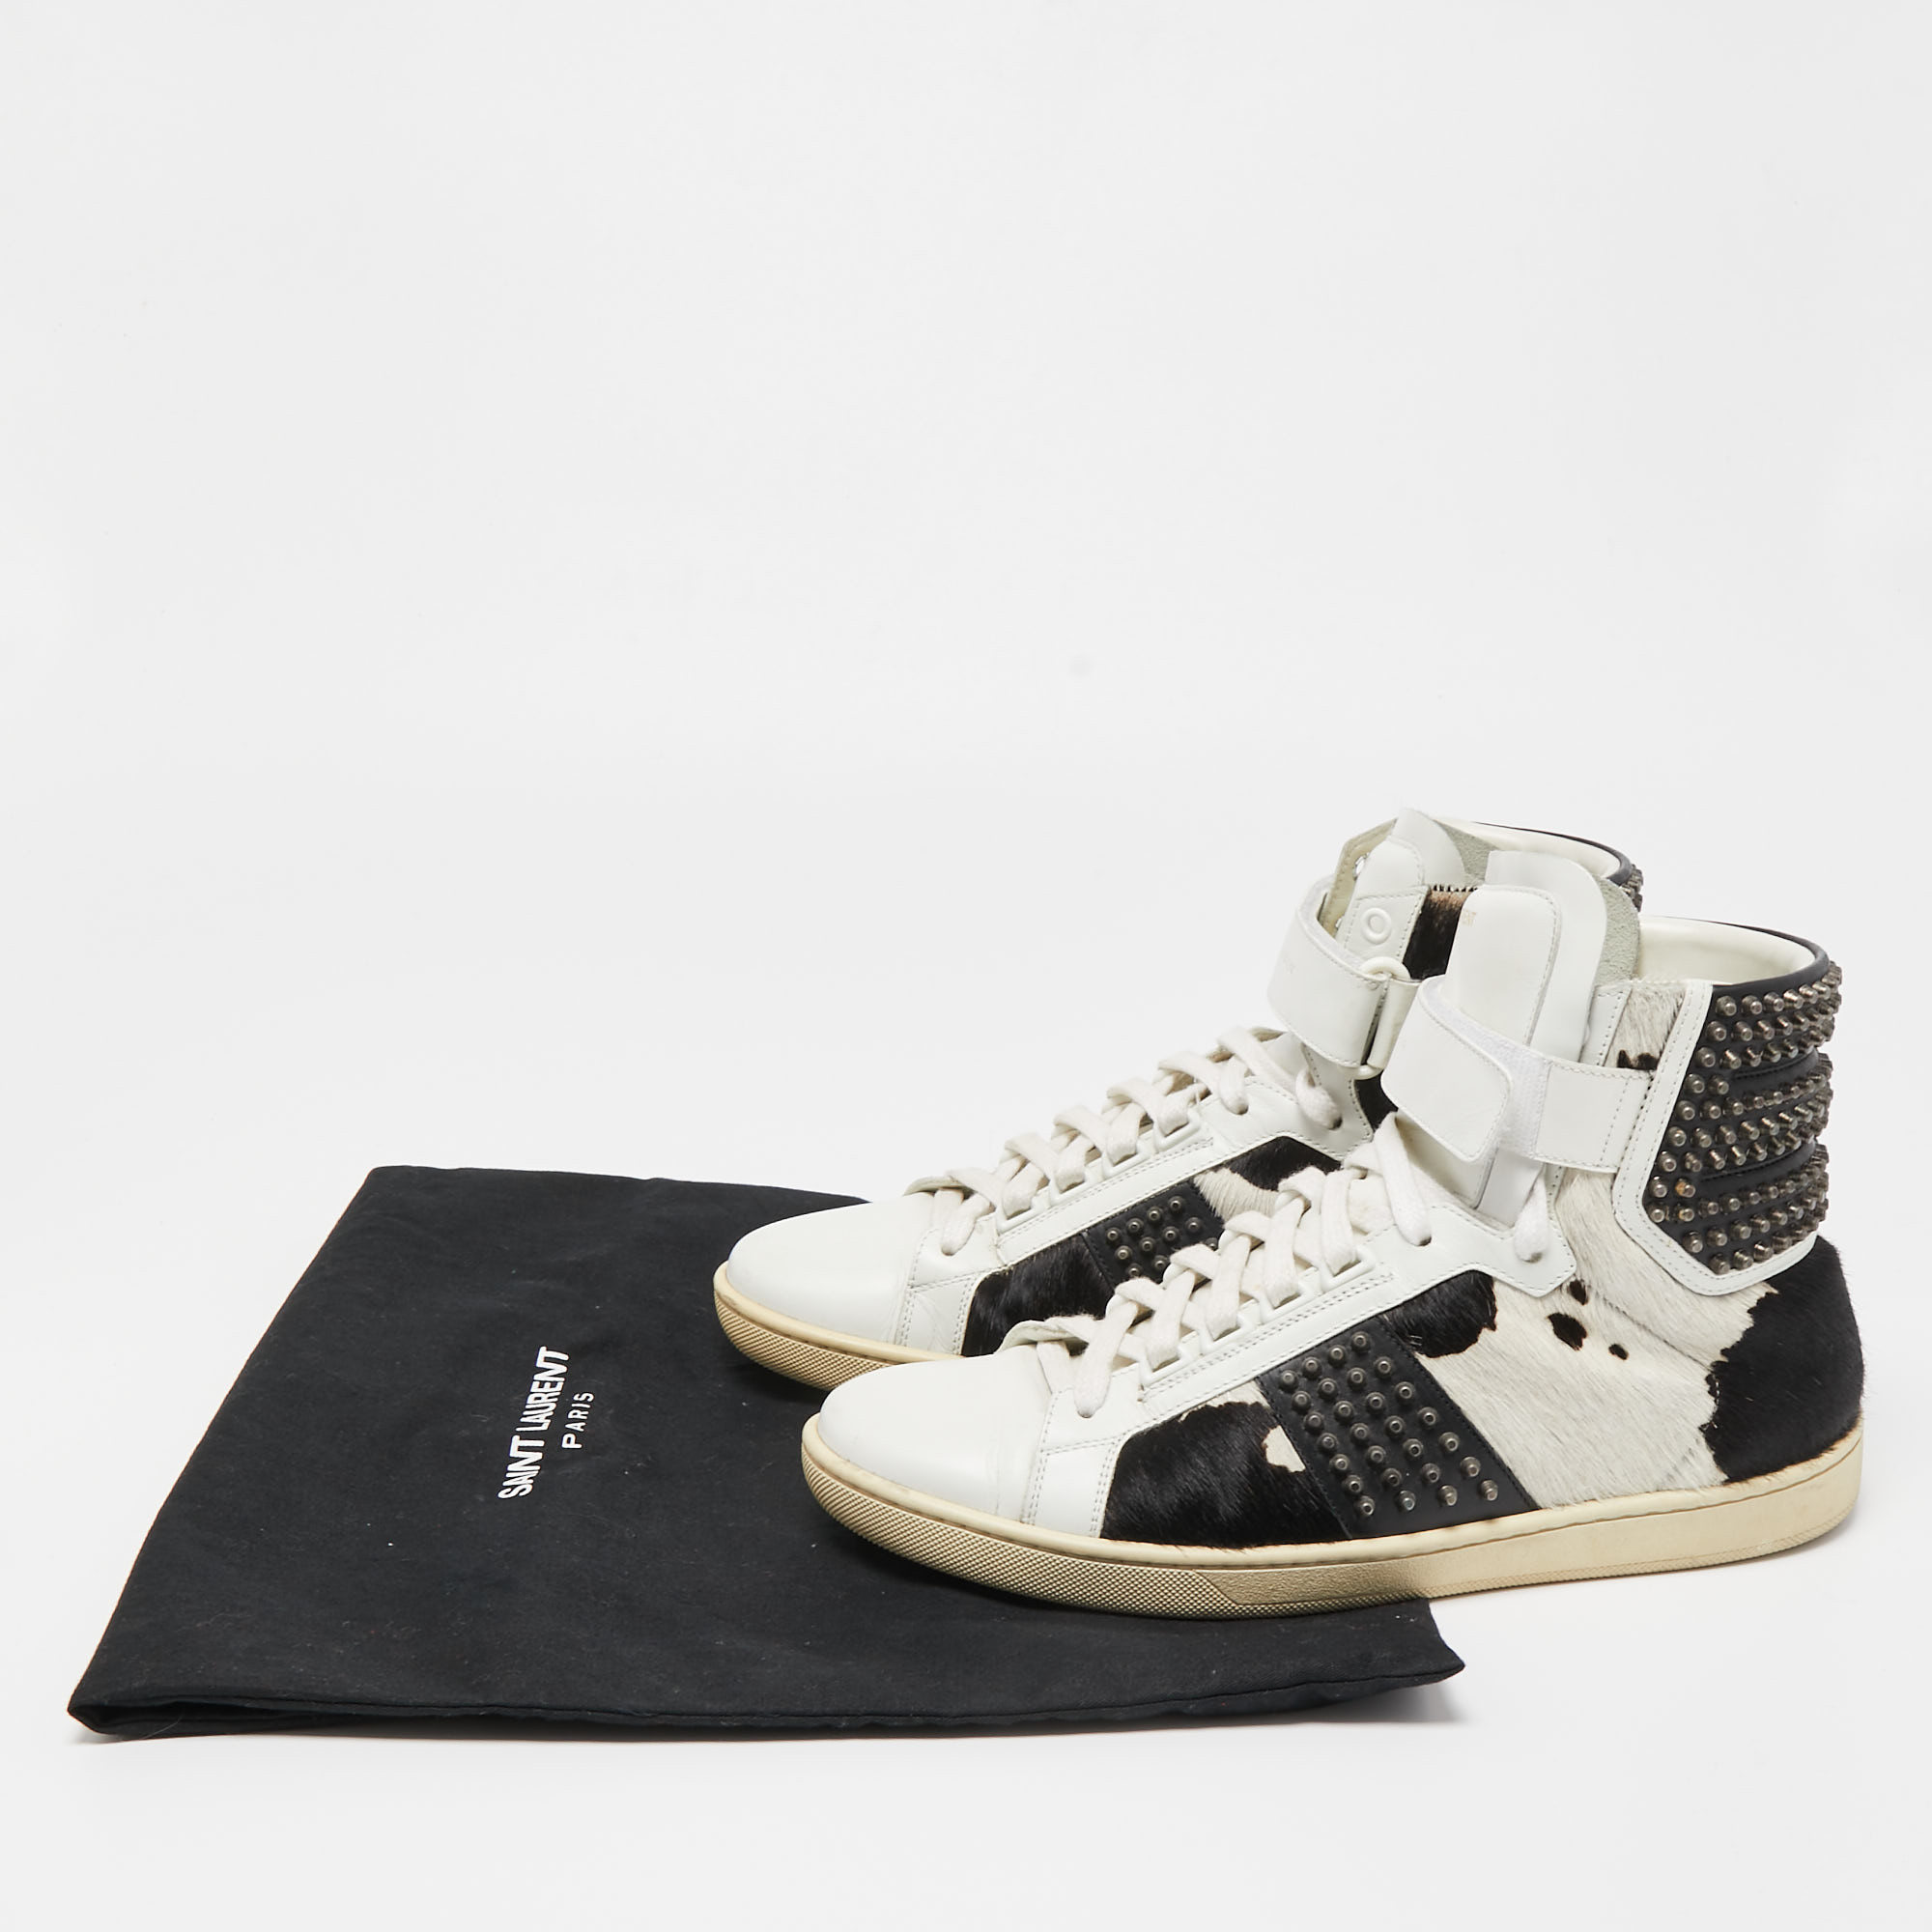 Saint Laurent Black/White Leather And Calf Hair Studded High Top Sneakers Size 41